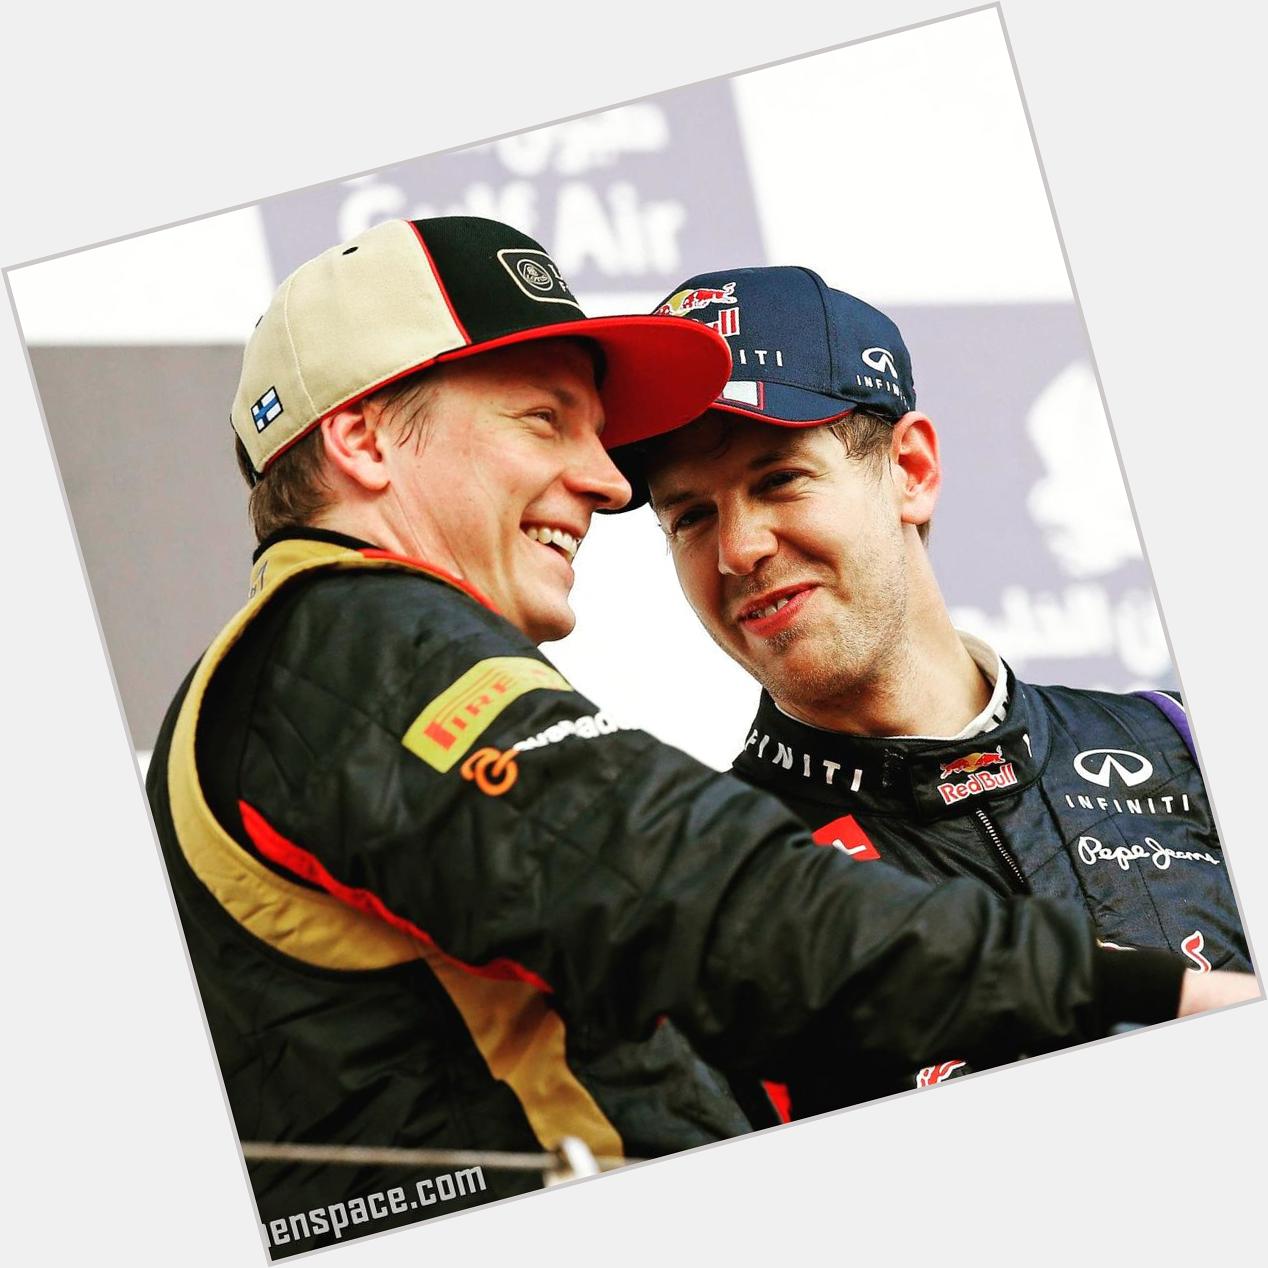 Happy birthday Sebastian Vettel. 28 years old now. What a talent. Please dont let this bromance end. 